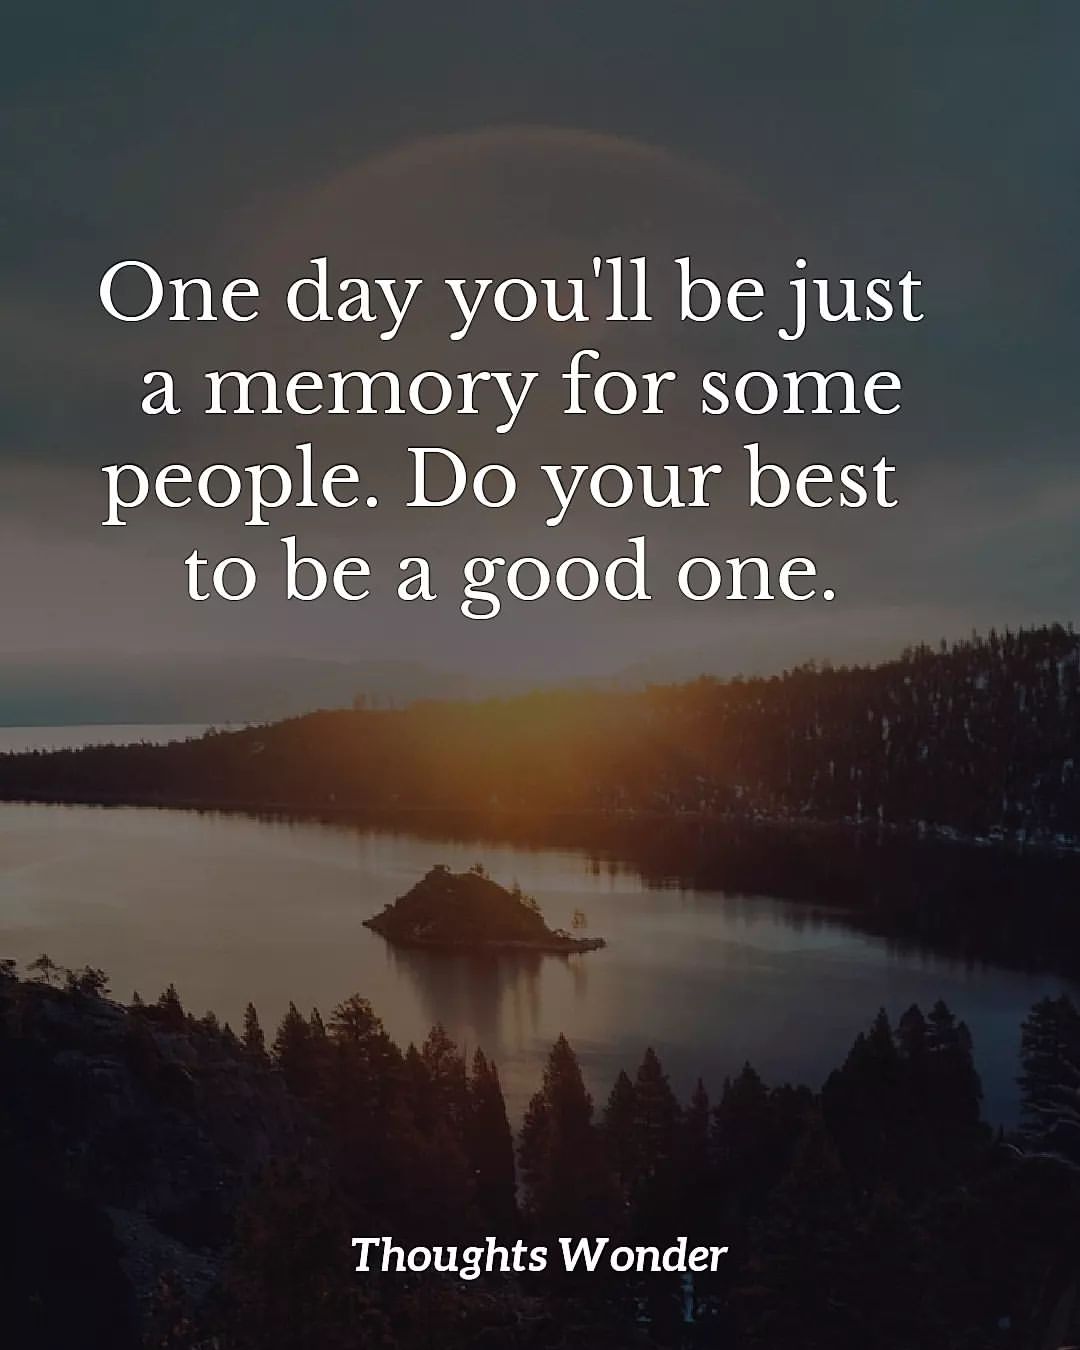 One day you'll be just a memory for some people. Do your best to be a good one.